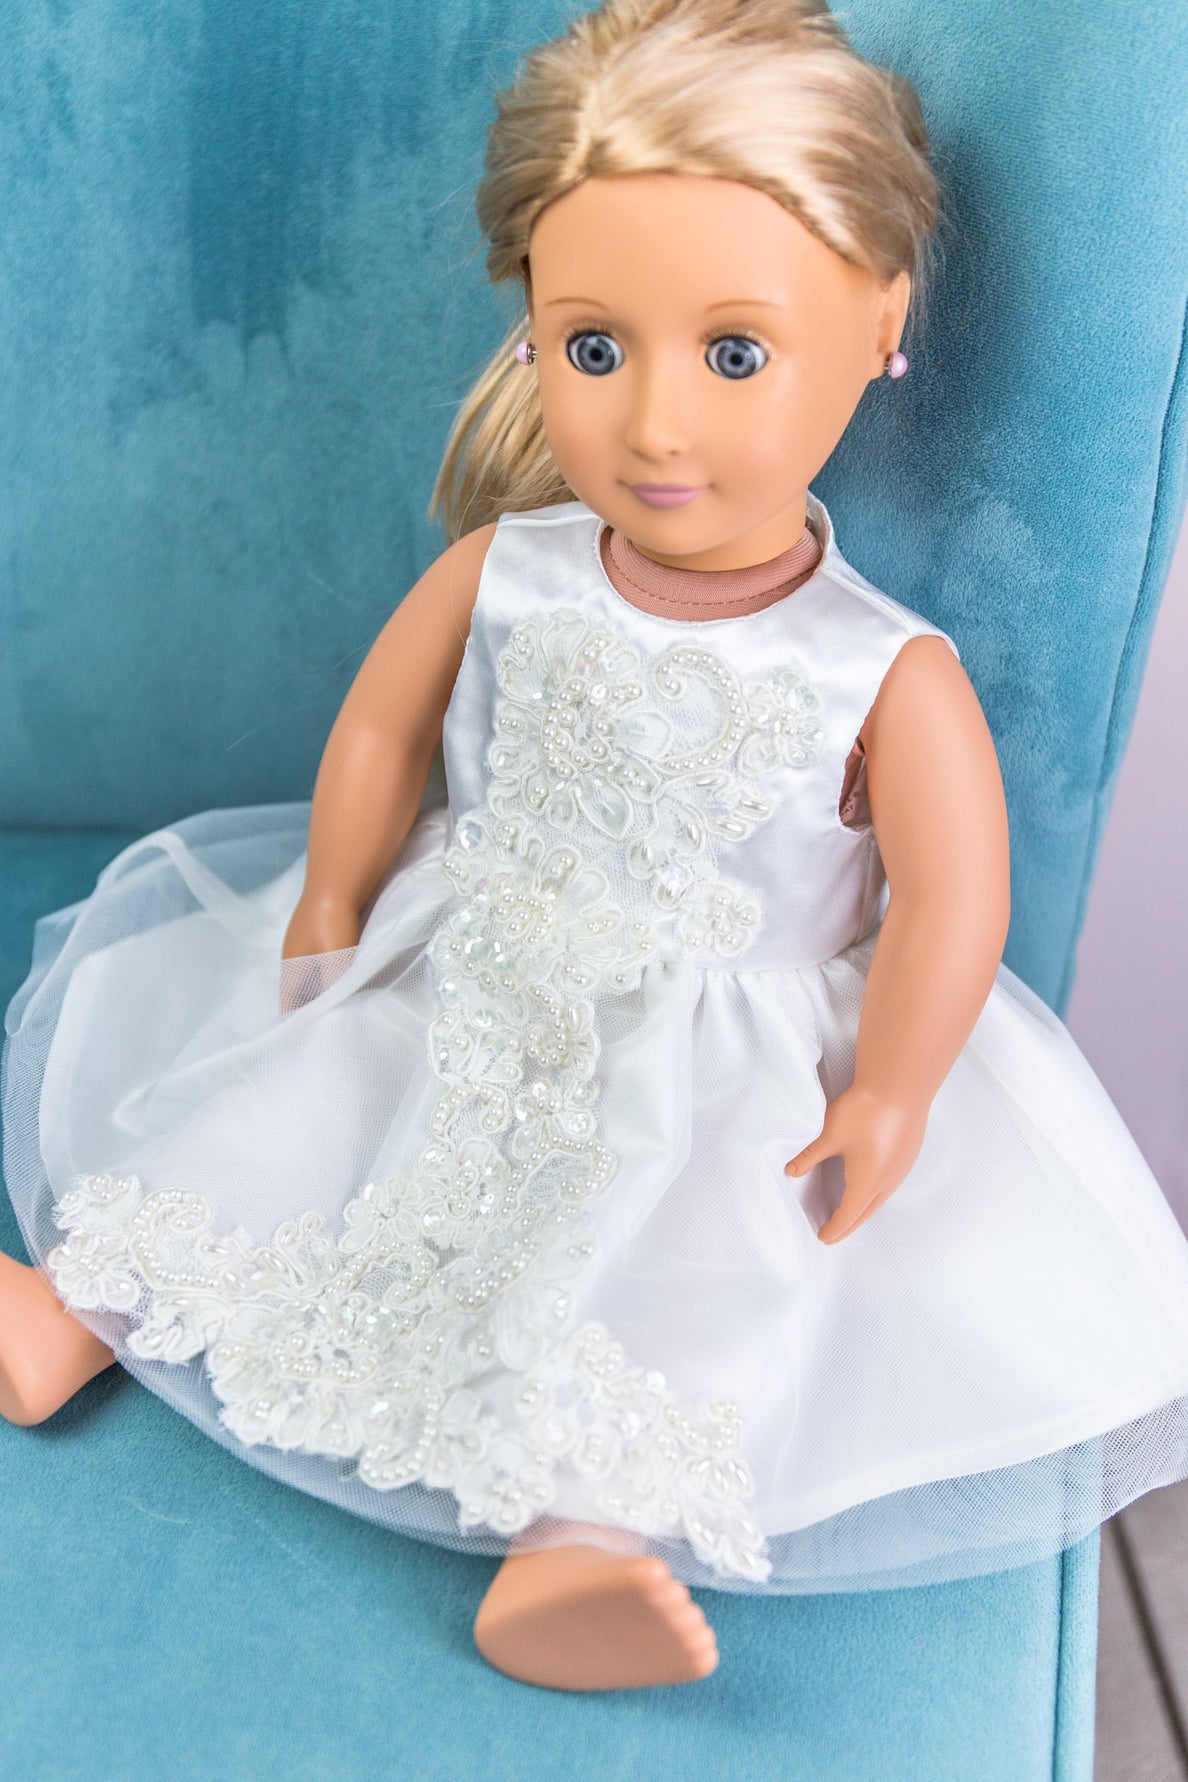 Matching Doll Dress Made From Wedding Gown